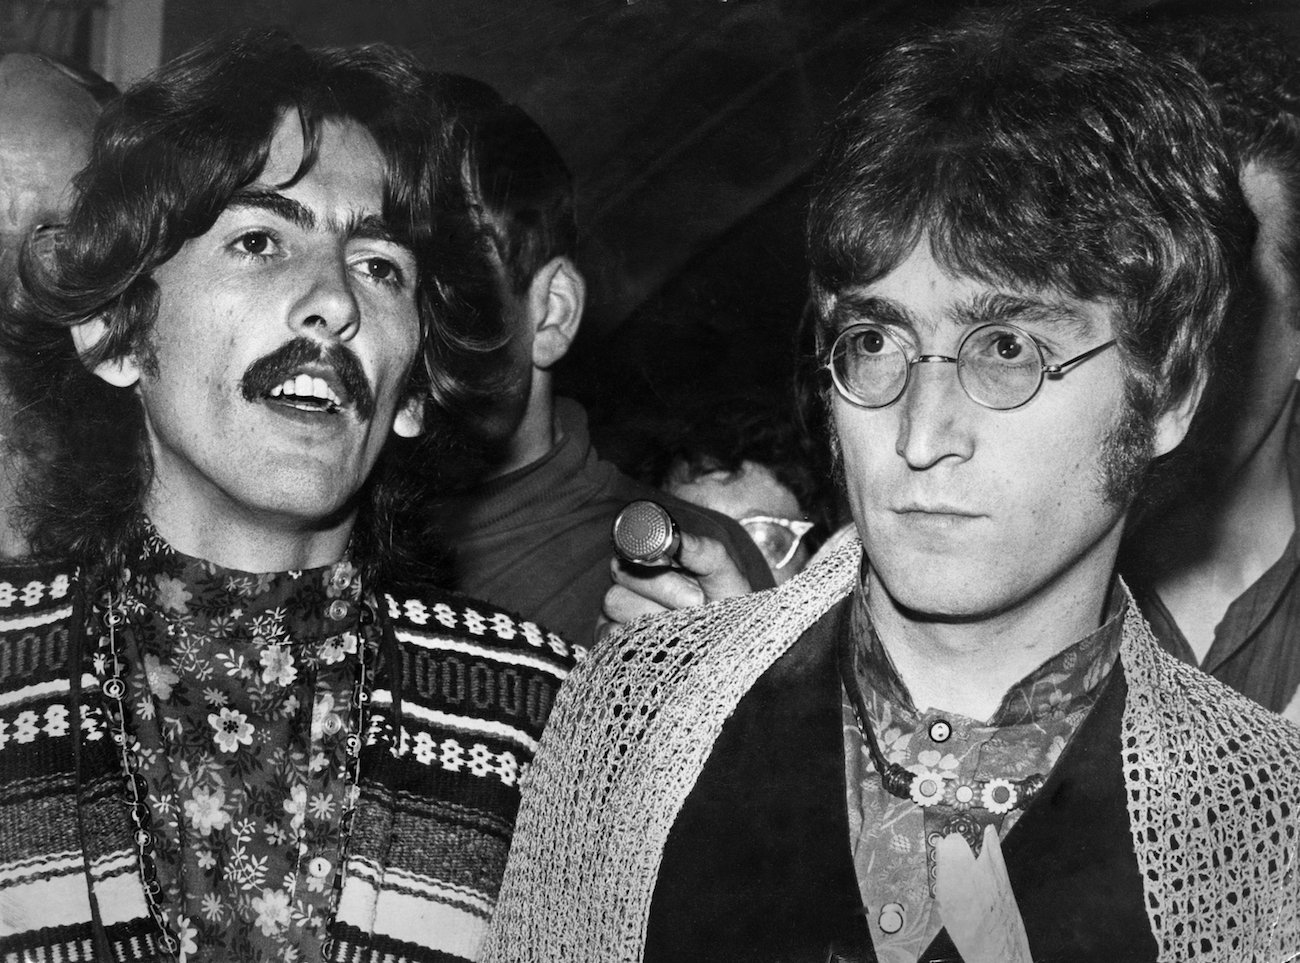 John Lennon and George Harrison following the death of The Beatles' manager, Brian Epstein, in 1967.